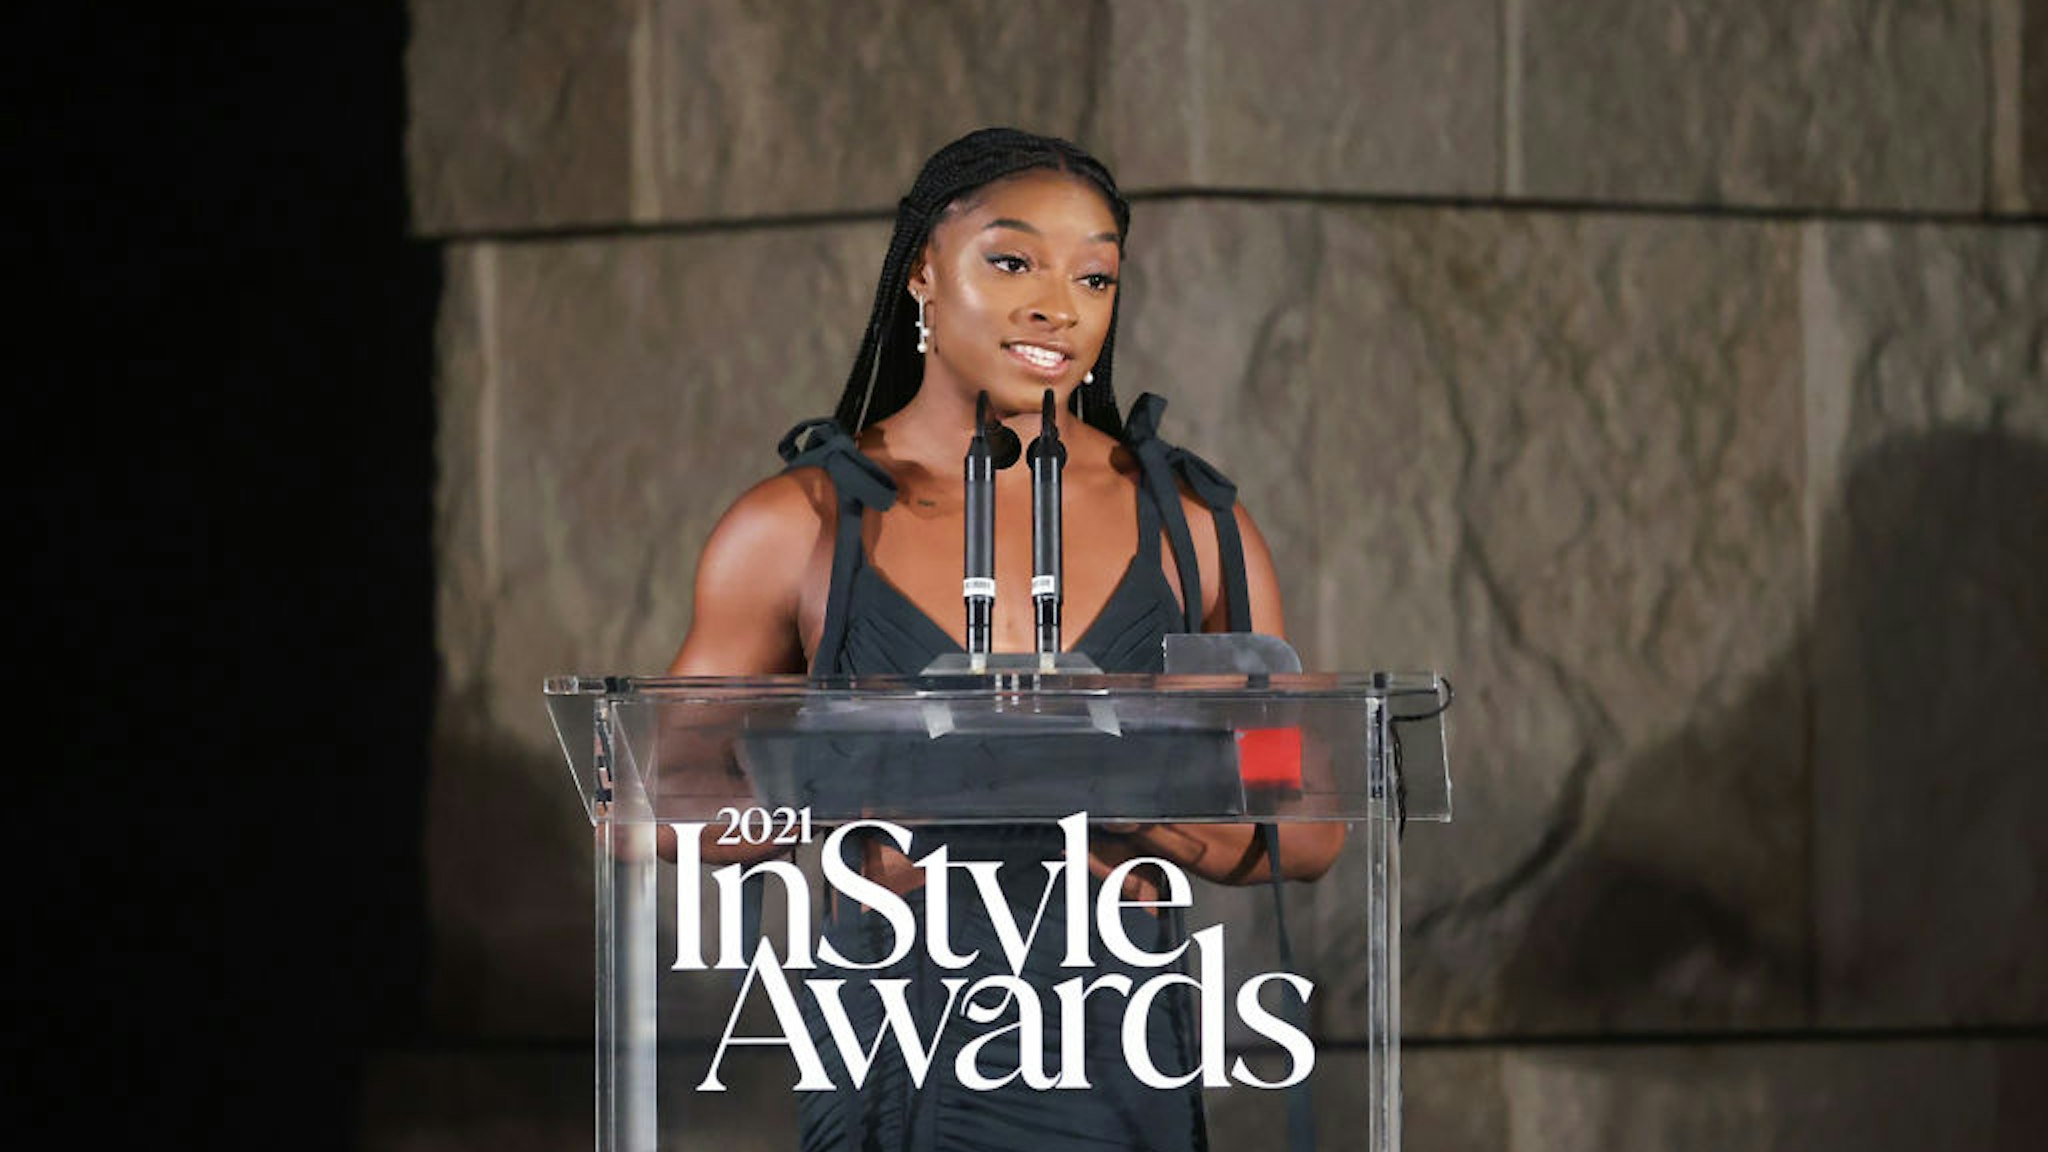 LOS ANGELES, CALIFORNIA - NOVEMBER 15: Honoree Simone Biles accepts The Original Award onstage during the 2021 InStyle Awards at The Getty Center on November 15, 2021 in Los Angeles, California. (Photo by Emma McIntyre/Getty Images for InStyle)